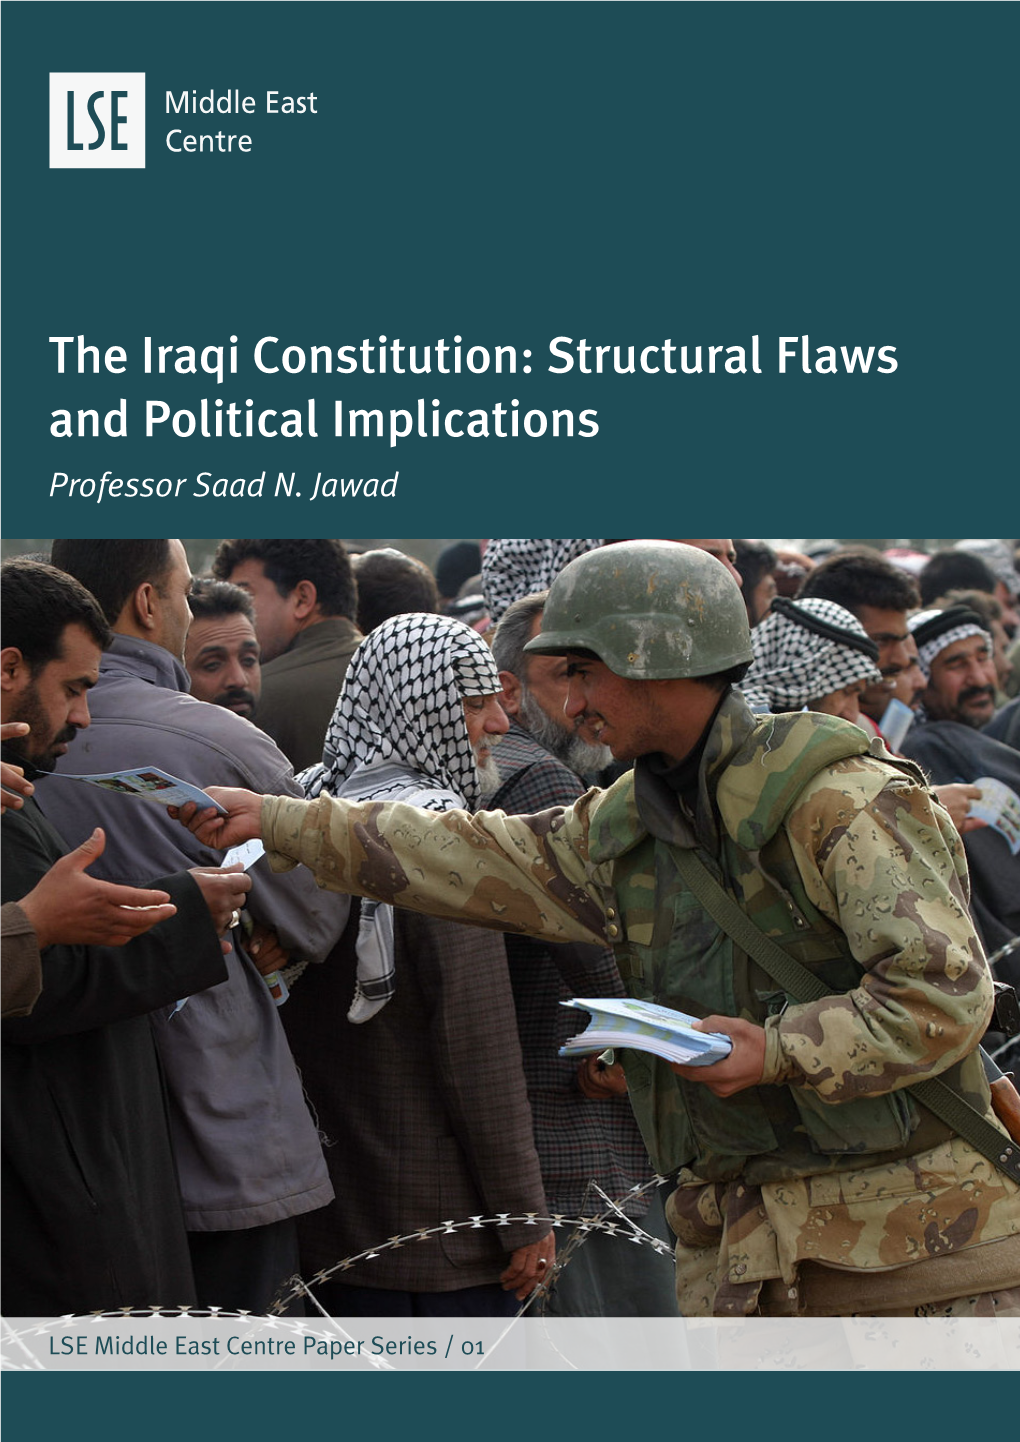 The Iraqi Constitution: Structural Flaws and Political Implications Professor Saad N